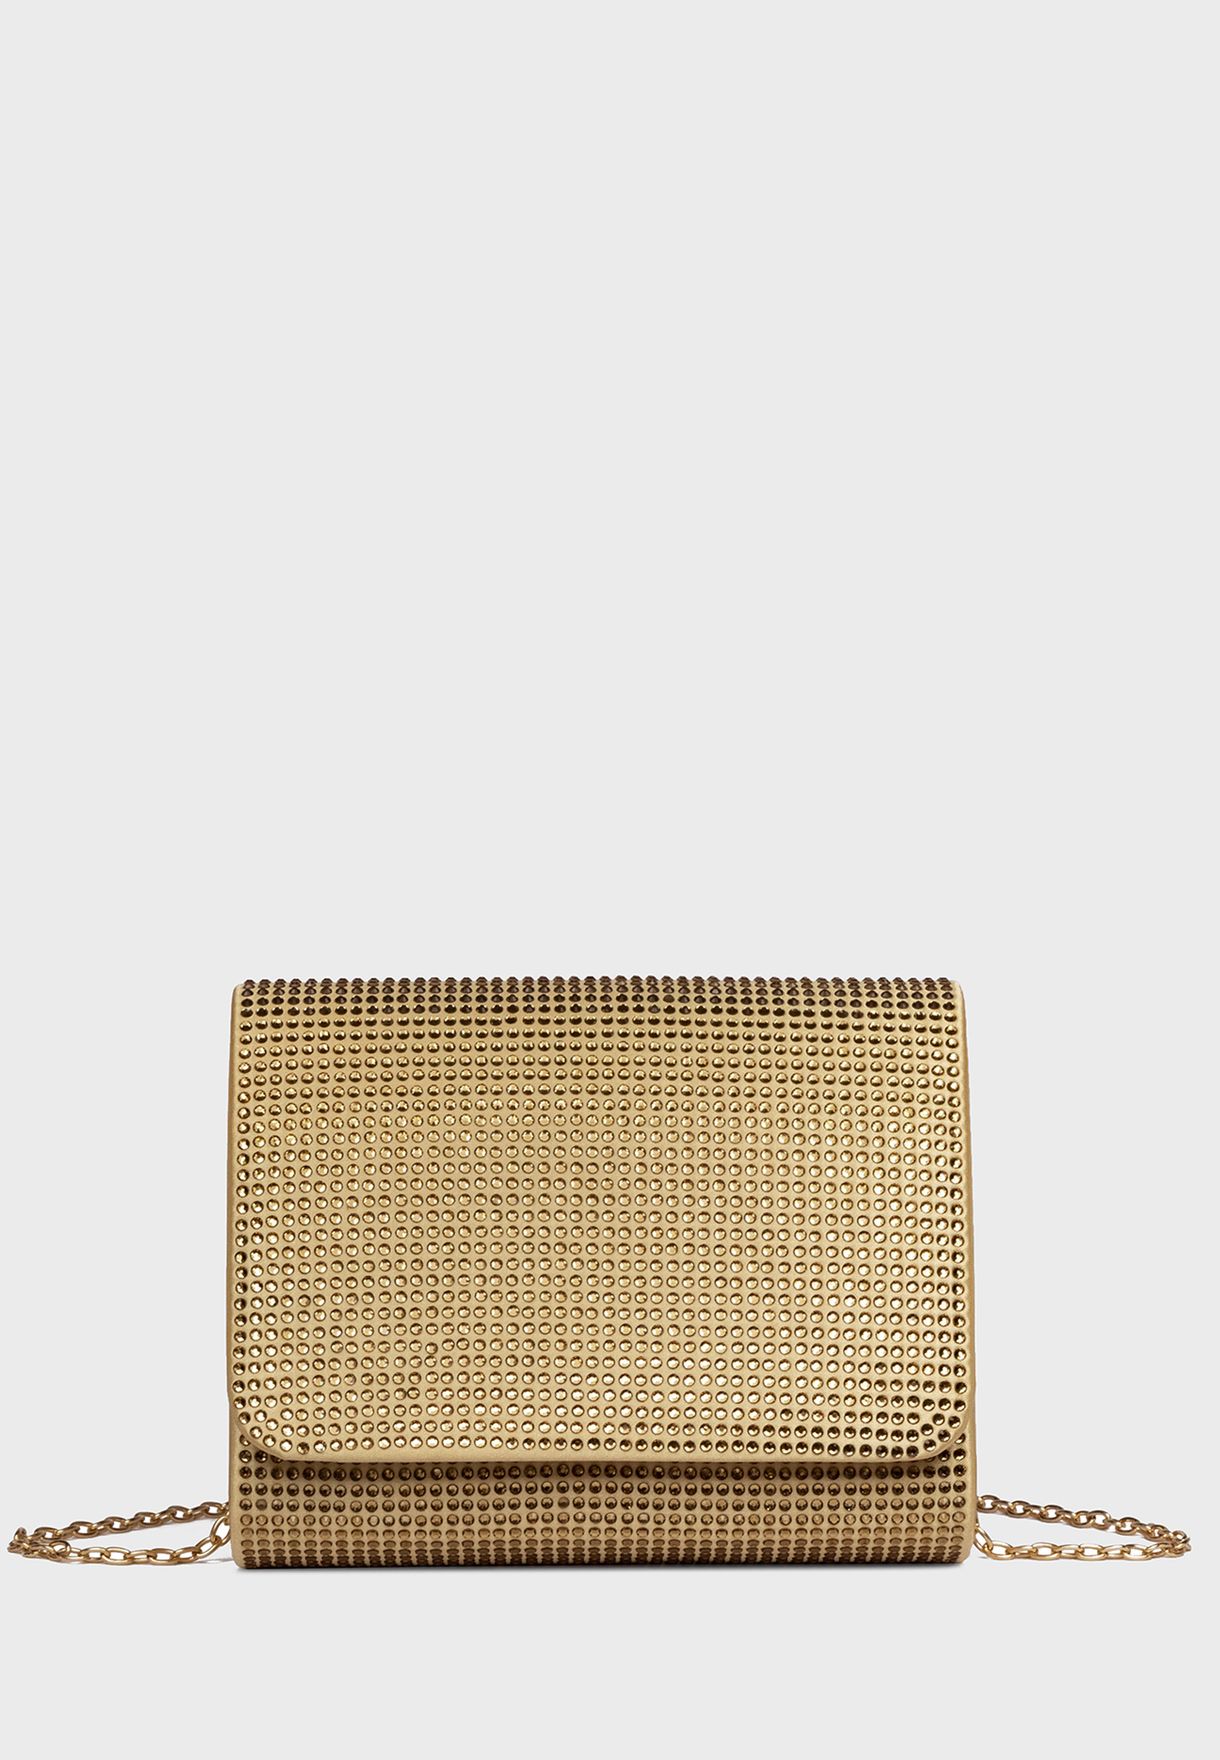 Casual Chain Detail Flap Over Embellished Clutch